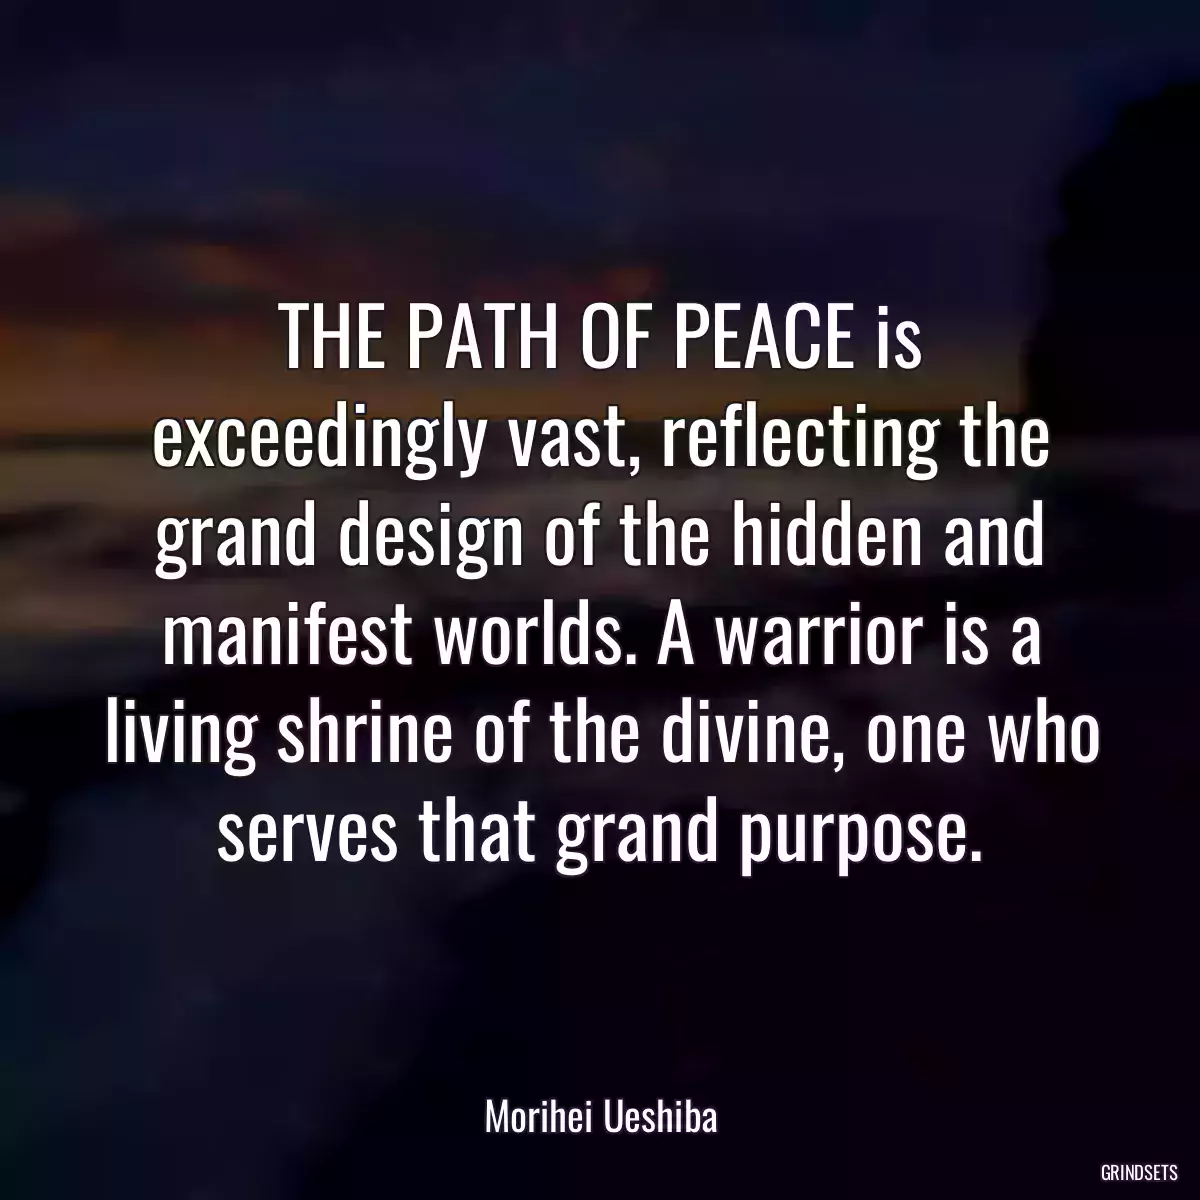 THE PATH OF PEACE is exceedingly vast, reflecting the grand design of the hidden and manifest worlds. A warrior is a living shrine of the divine, one who serves that grand purpose.